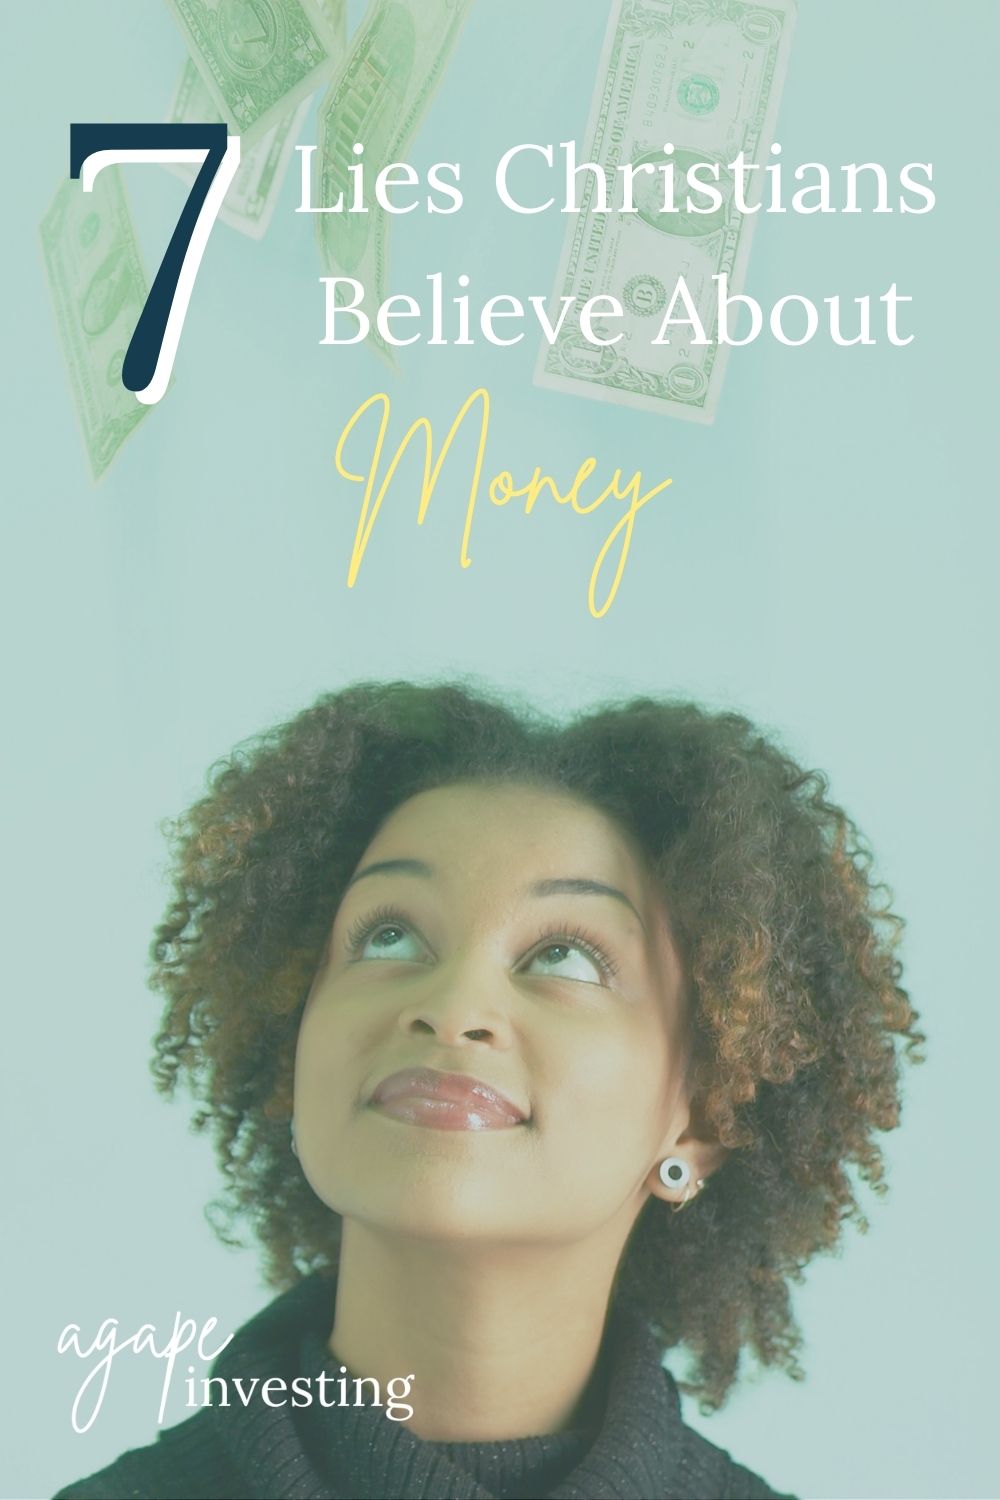 Money is a big deal in the Bible. There are over 2,300 Bible verses on money, wealth, possessions, and finances. In this article, I will break down some of the common misconceptions and lies Christians believe about money. #faithandfinance #christianmoney #moneycoach #biblicalmoney #christianfinance